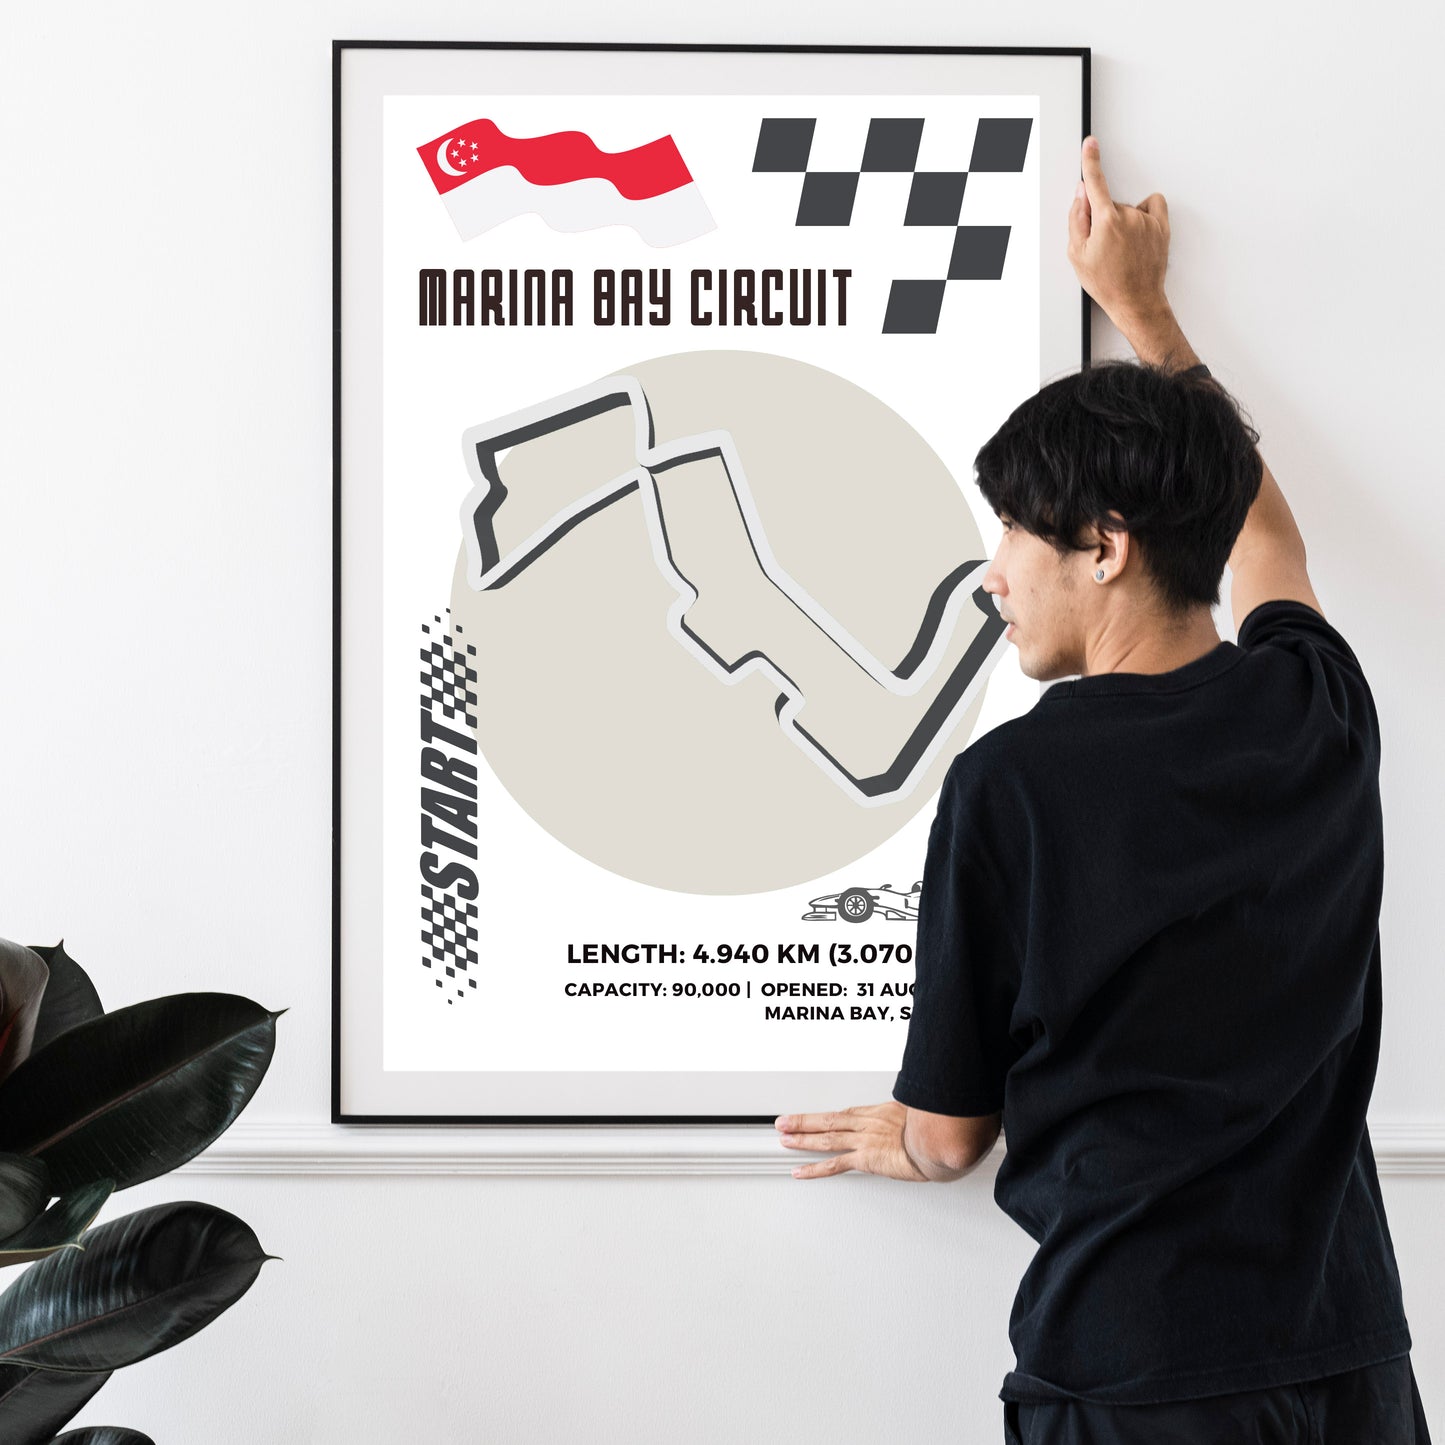 Explore the world of Formula One with Marina Bay Circuit F1 Singapore Posters. These posters feature a detailed map and guide of the racing tracks, perfect for any Formula One fan. Made with matte premium paper that is age-resistant, these posters are produced in the UK and showcase the history and notable moments of each circuit. Get your complete Formula One experience with these Grand Prix Poster Art Prints.